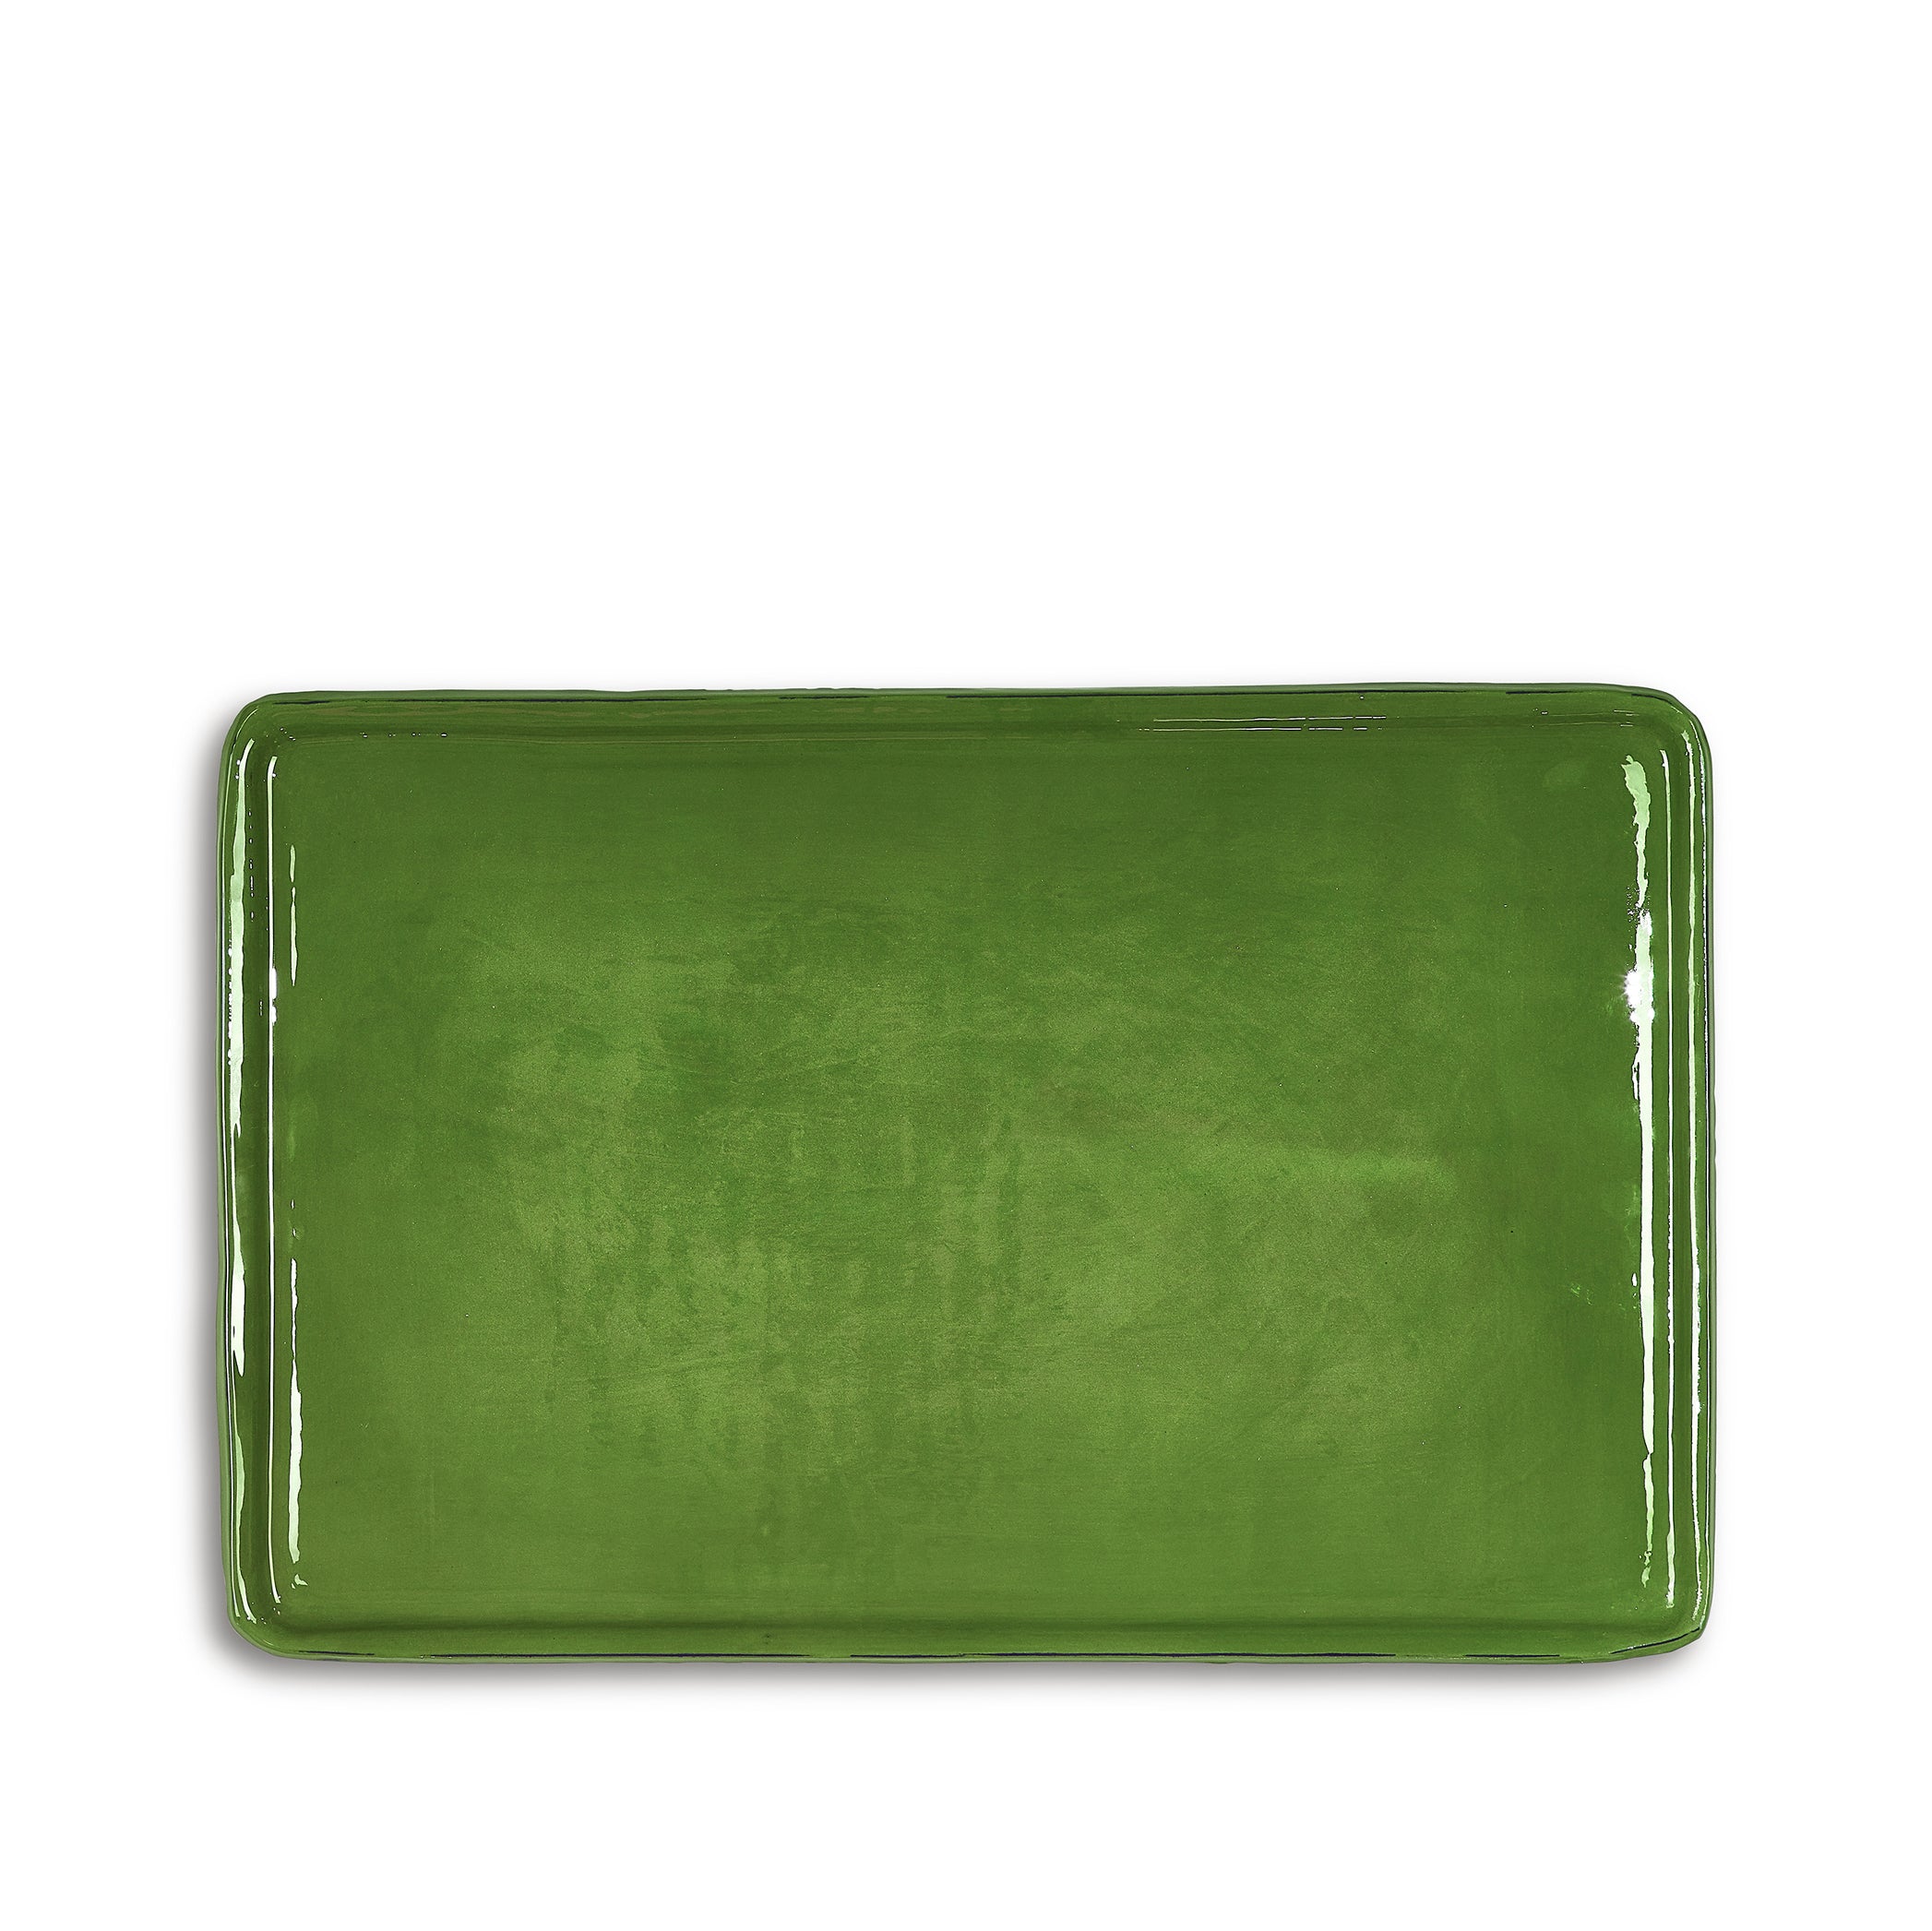 Ceramic Serving Tray in Green